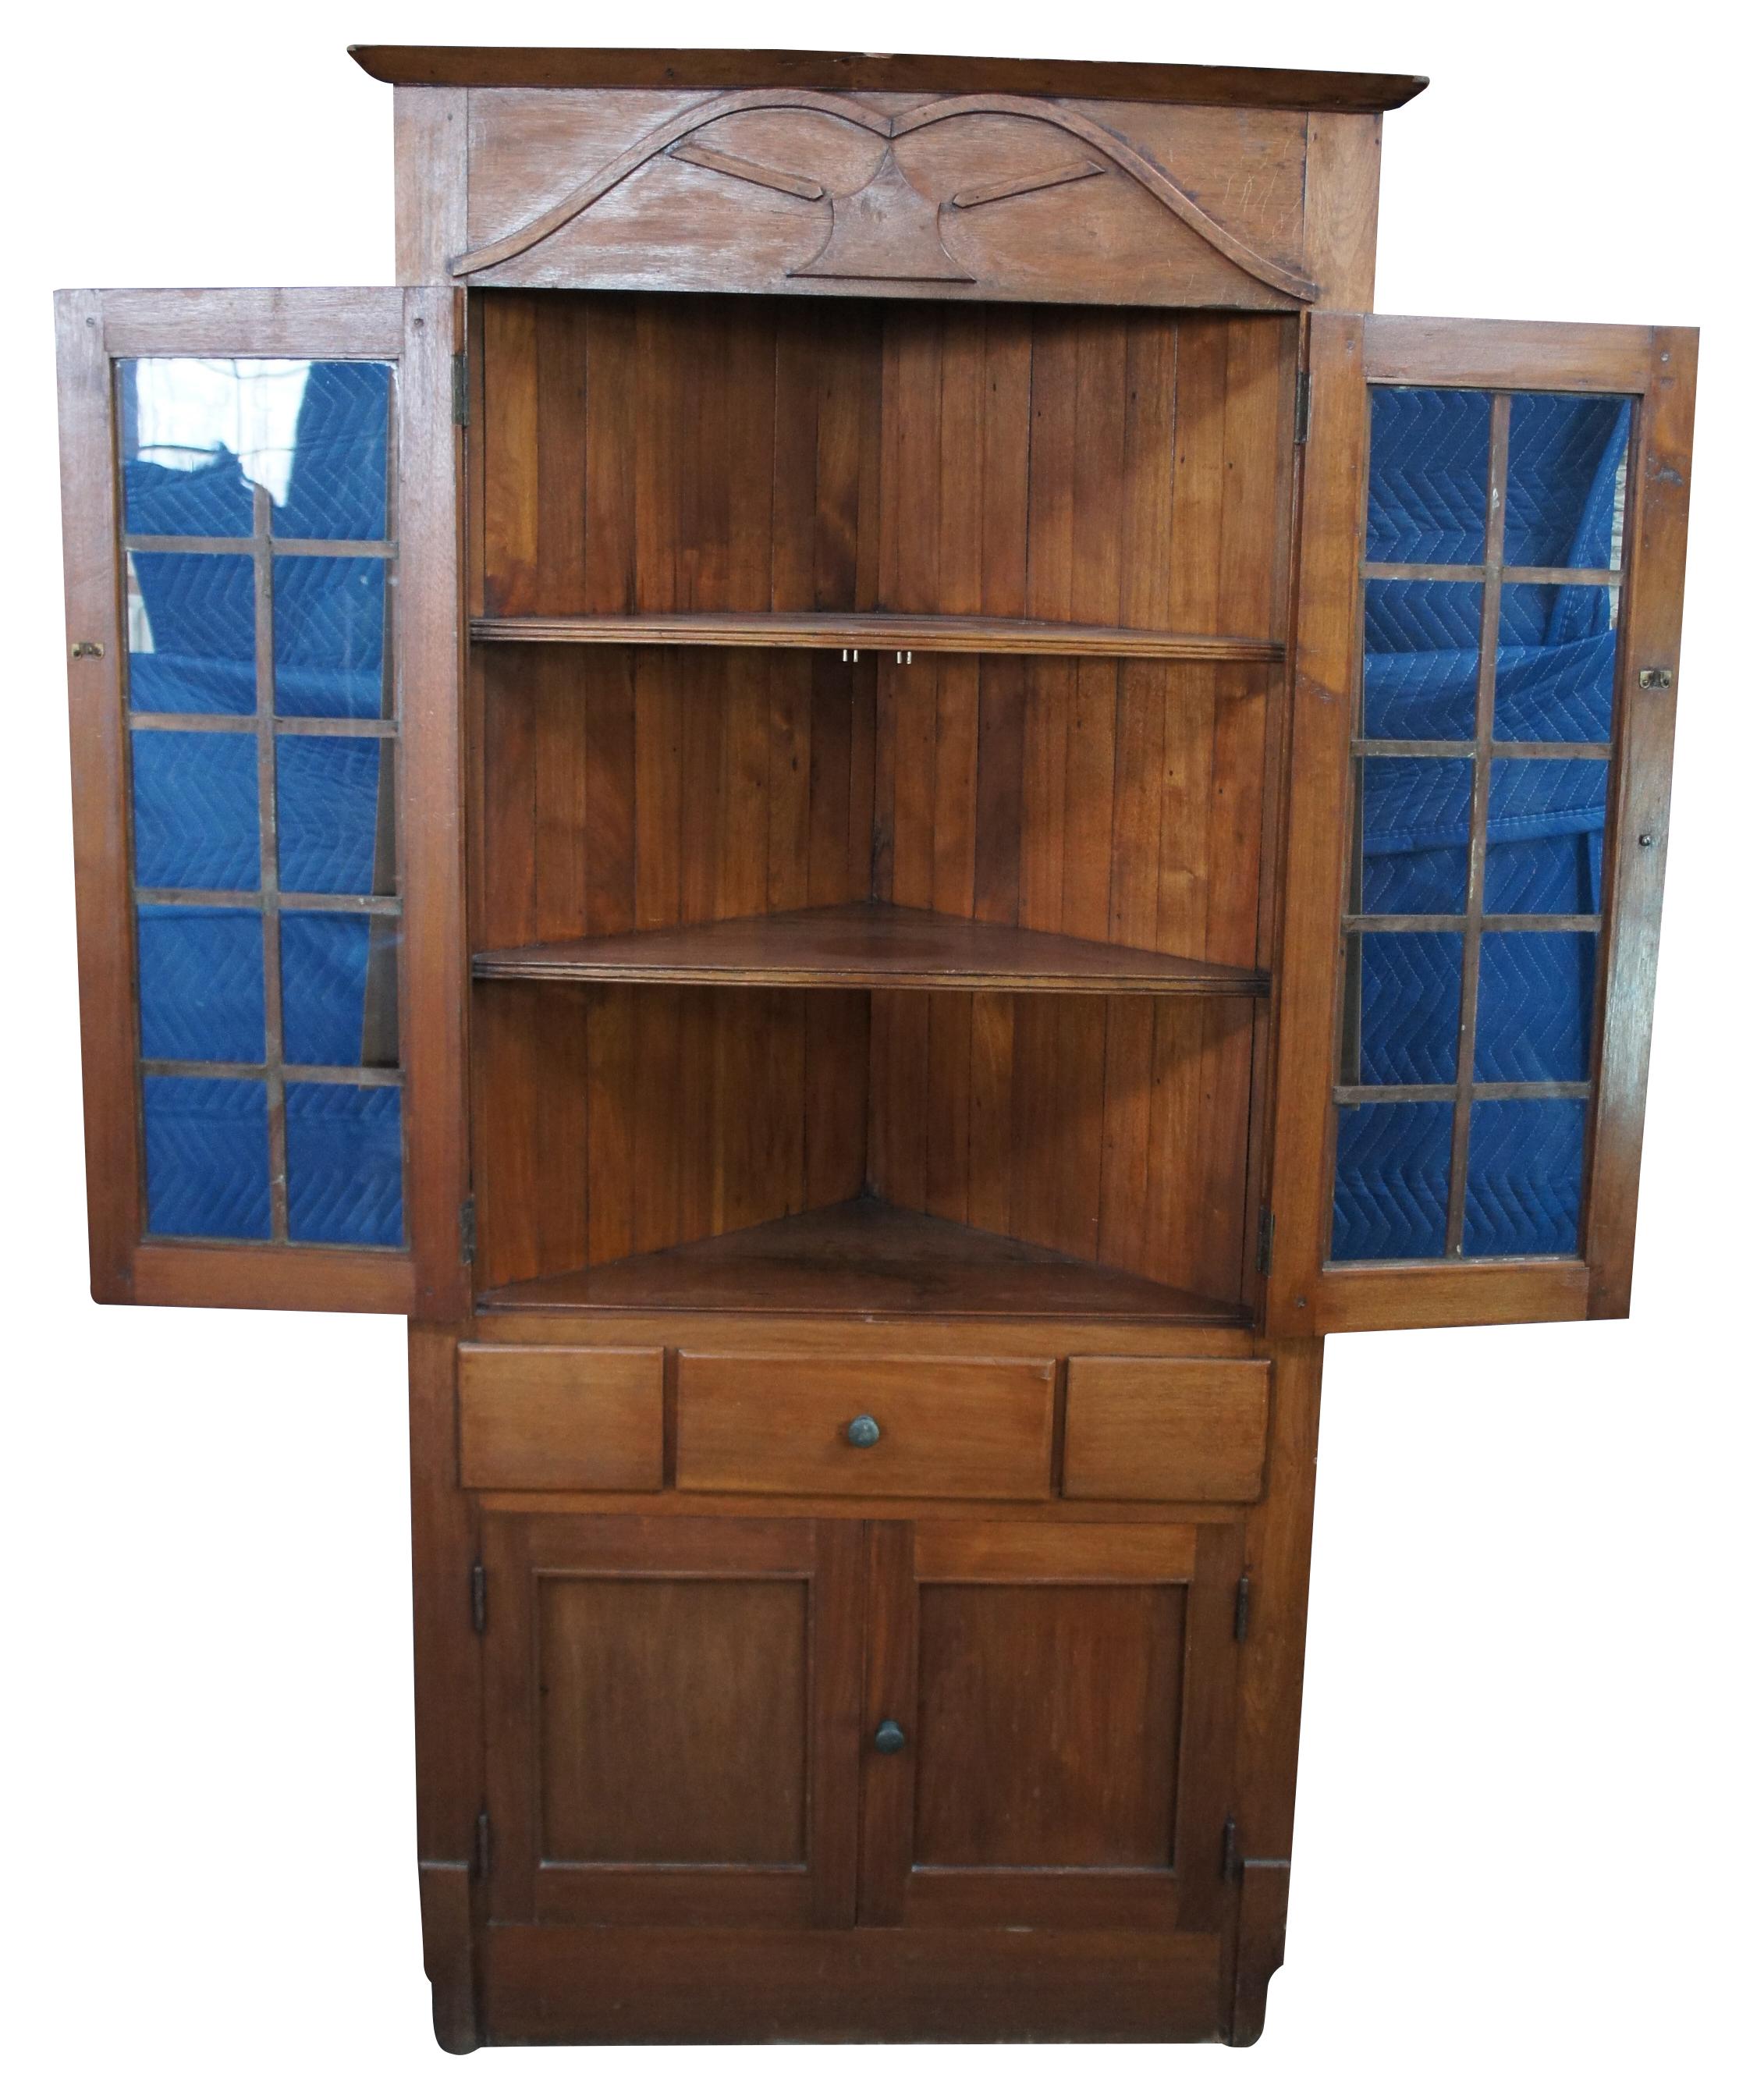 Antique oak corner display cabinet, curio or cupboard featuring upper cabinet with three shelves, central drawer and lower cabinet.
 